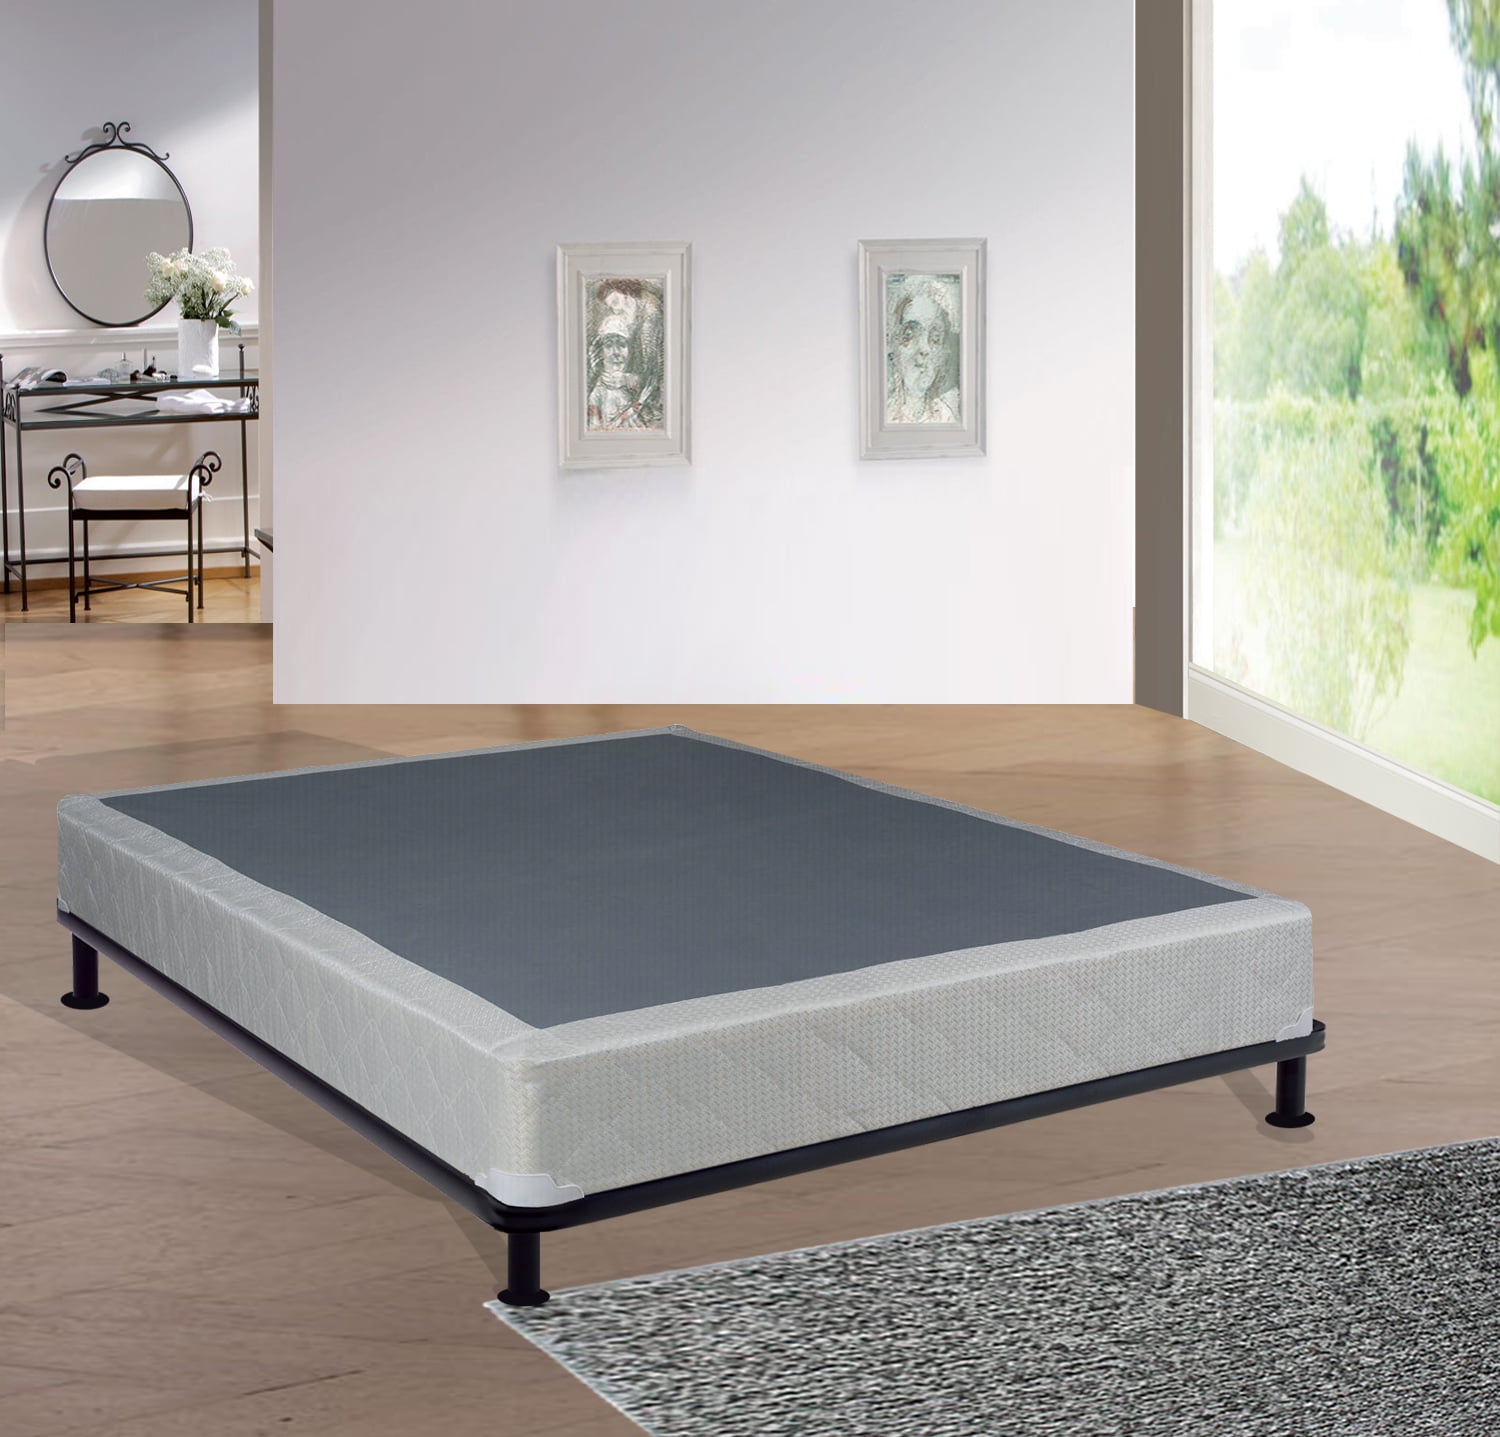 Details about   Wooden Bed Box Spring Mattress Bedroom Furniture Sleep Twin Full California King 